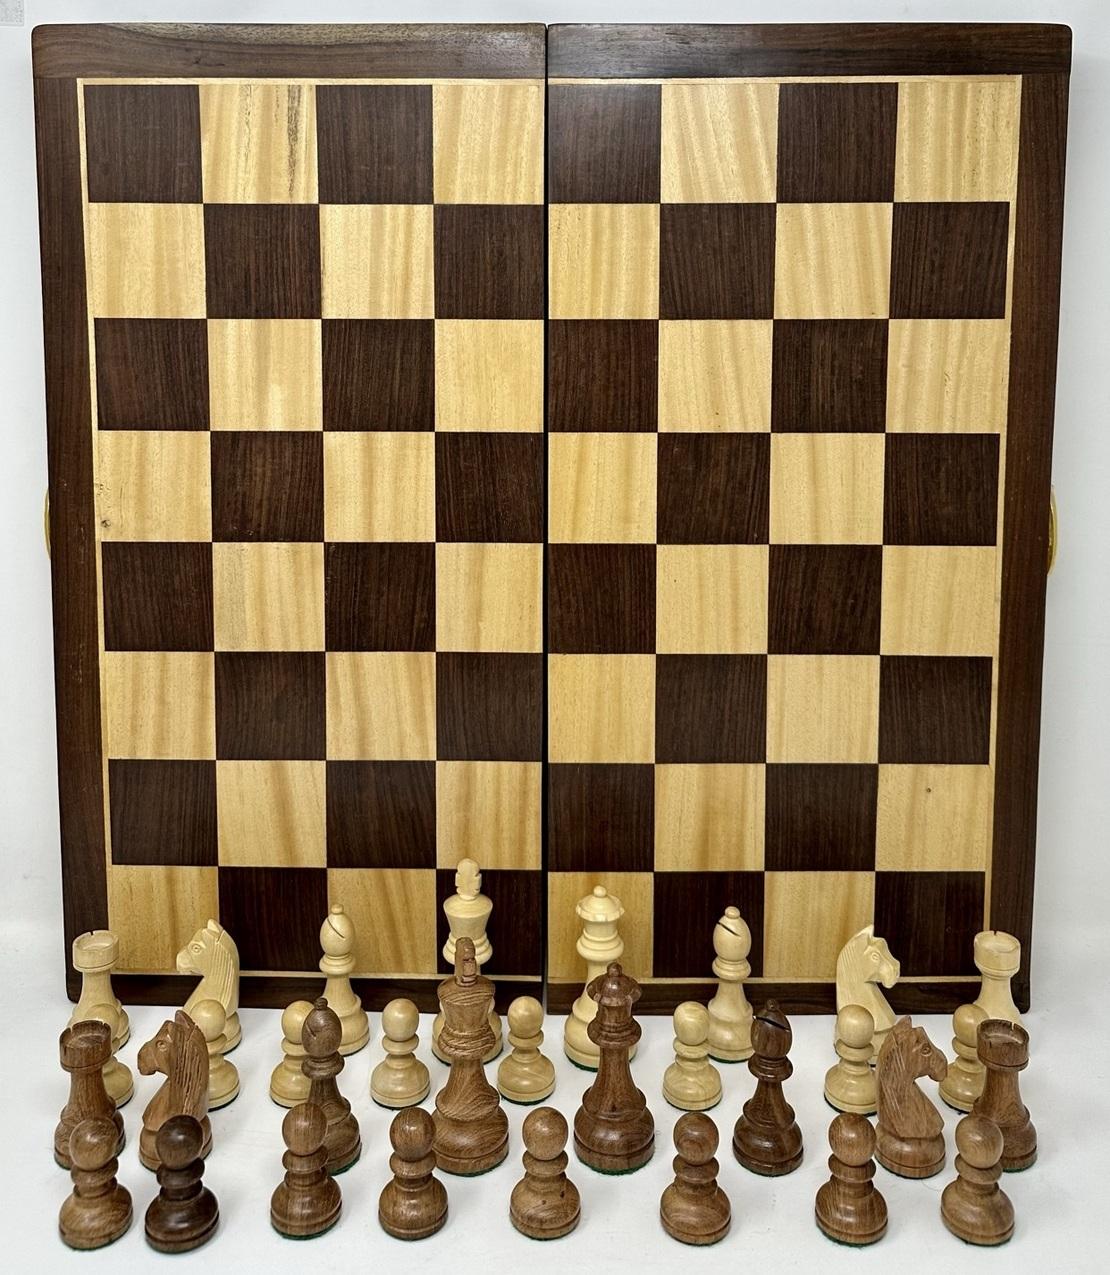 A Very Substantial Decorative French Polished Well Grained Dark Santos Mahogany and Boxwood Folding Chess Set of outstanding quality, good weight and seldom offered generous proportions (20